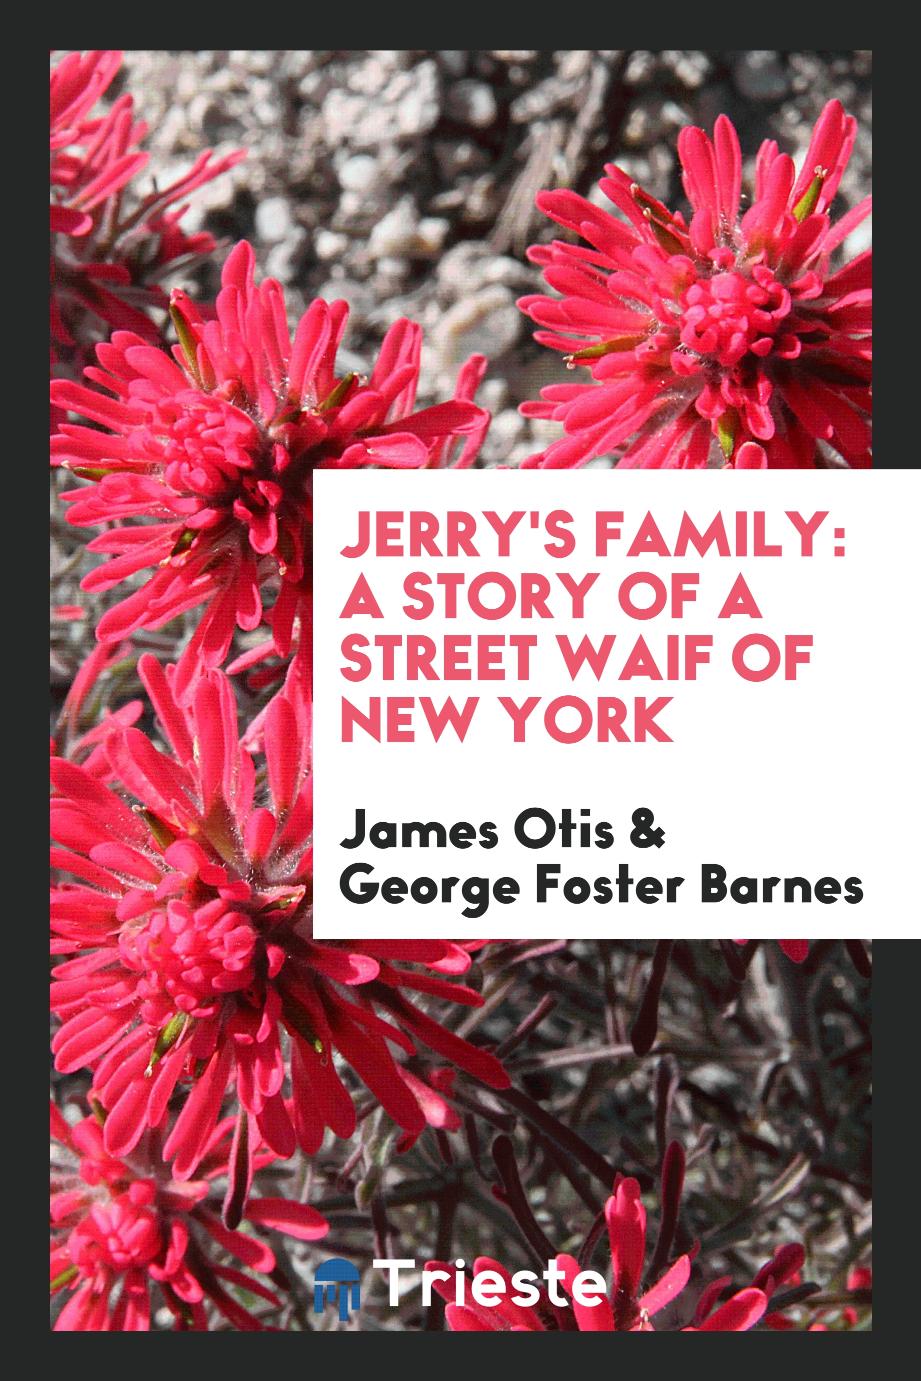 Jerry's Family: A Story of a Street Waif of New York